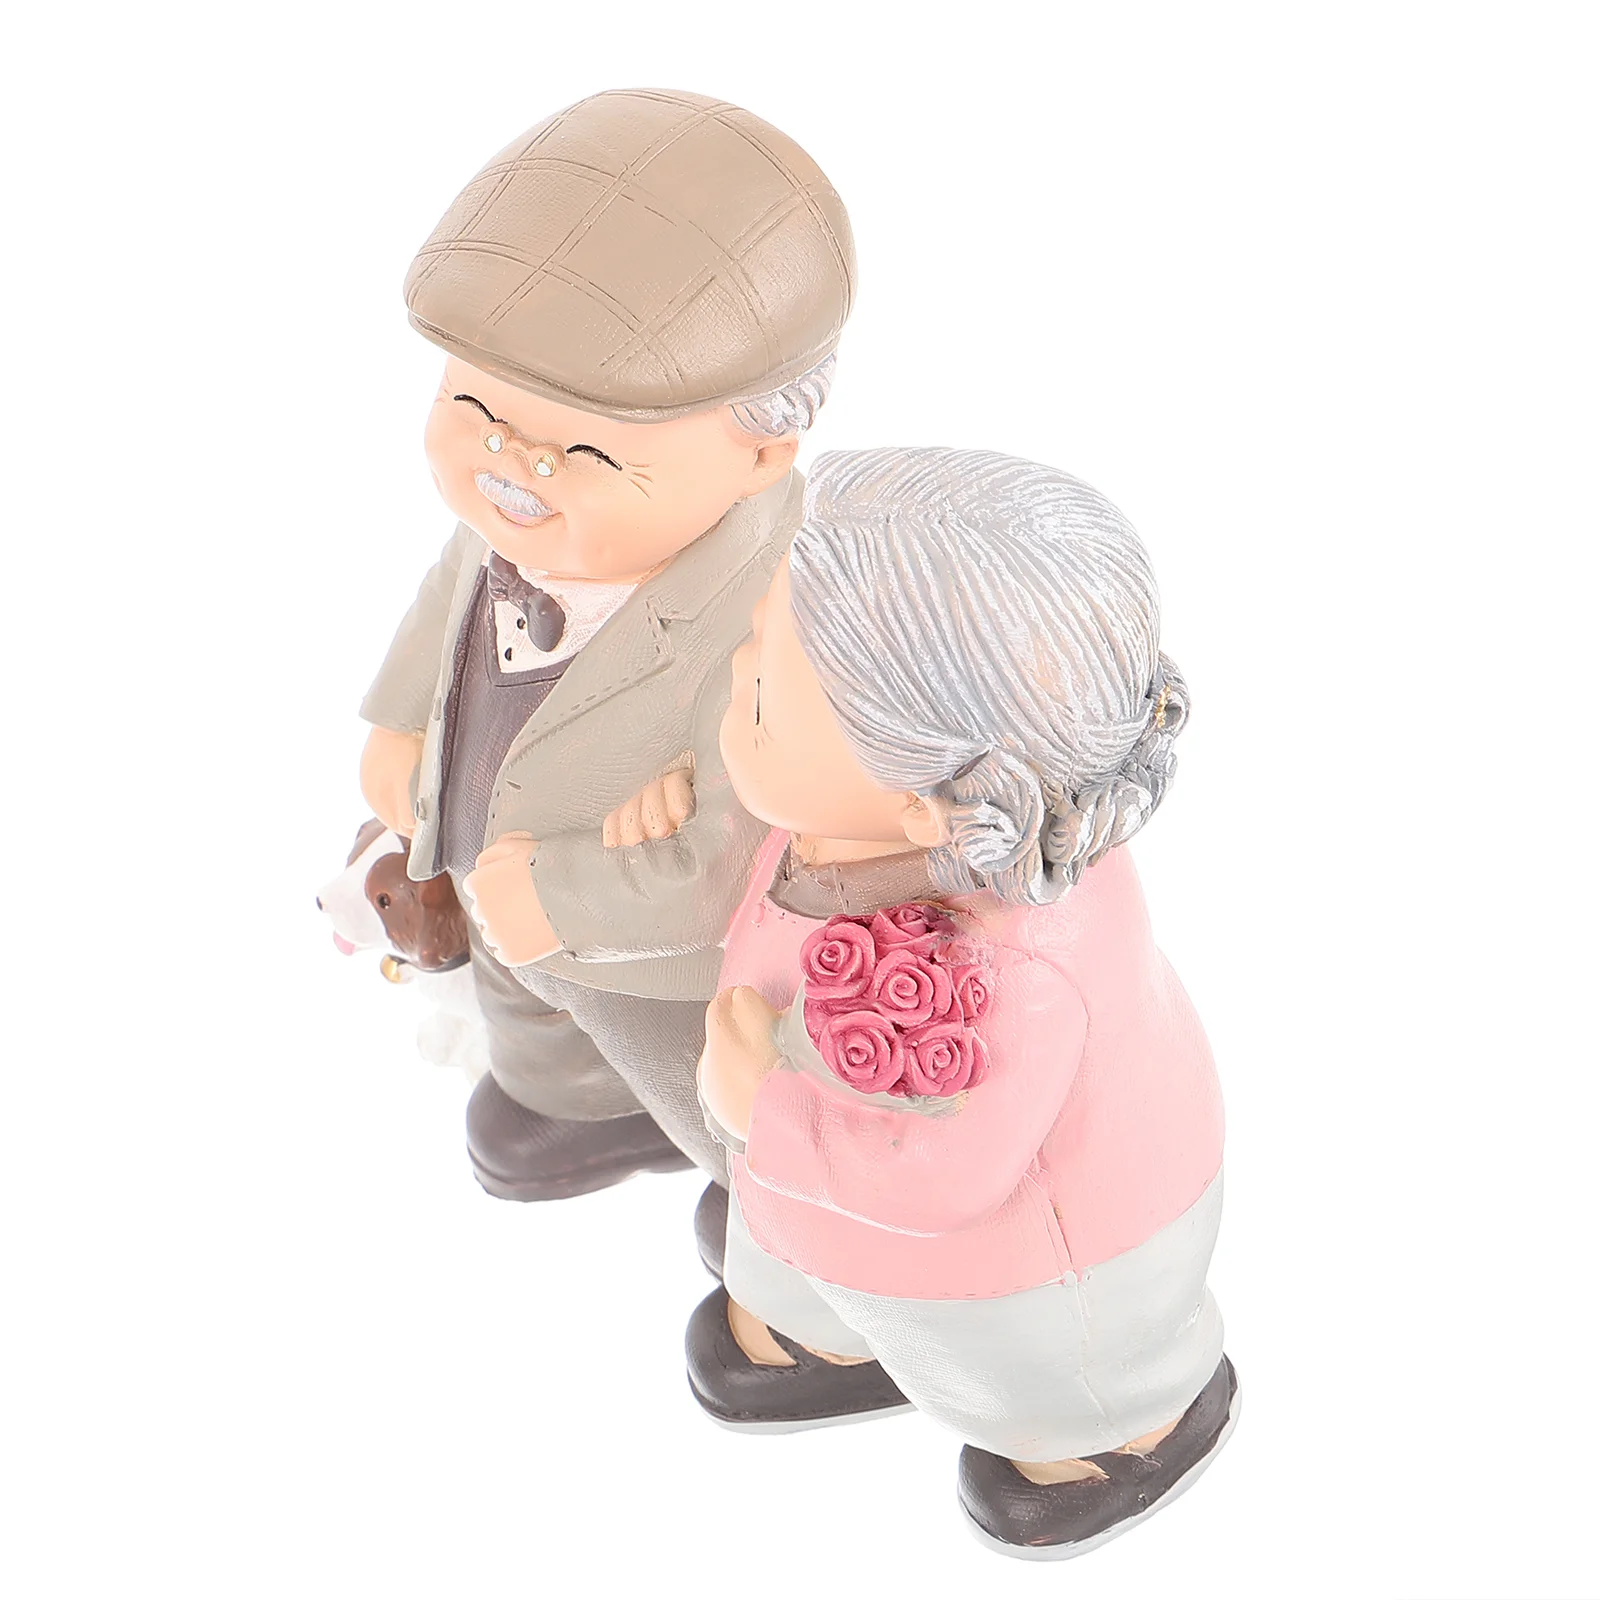 

Old Man Granny Ornaments Resin Decoration Lovely Adornment Eye-catching Multi-color Caring Figurine Wedding Cupcake